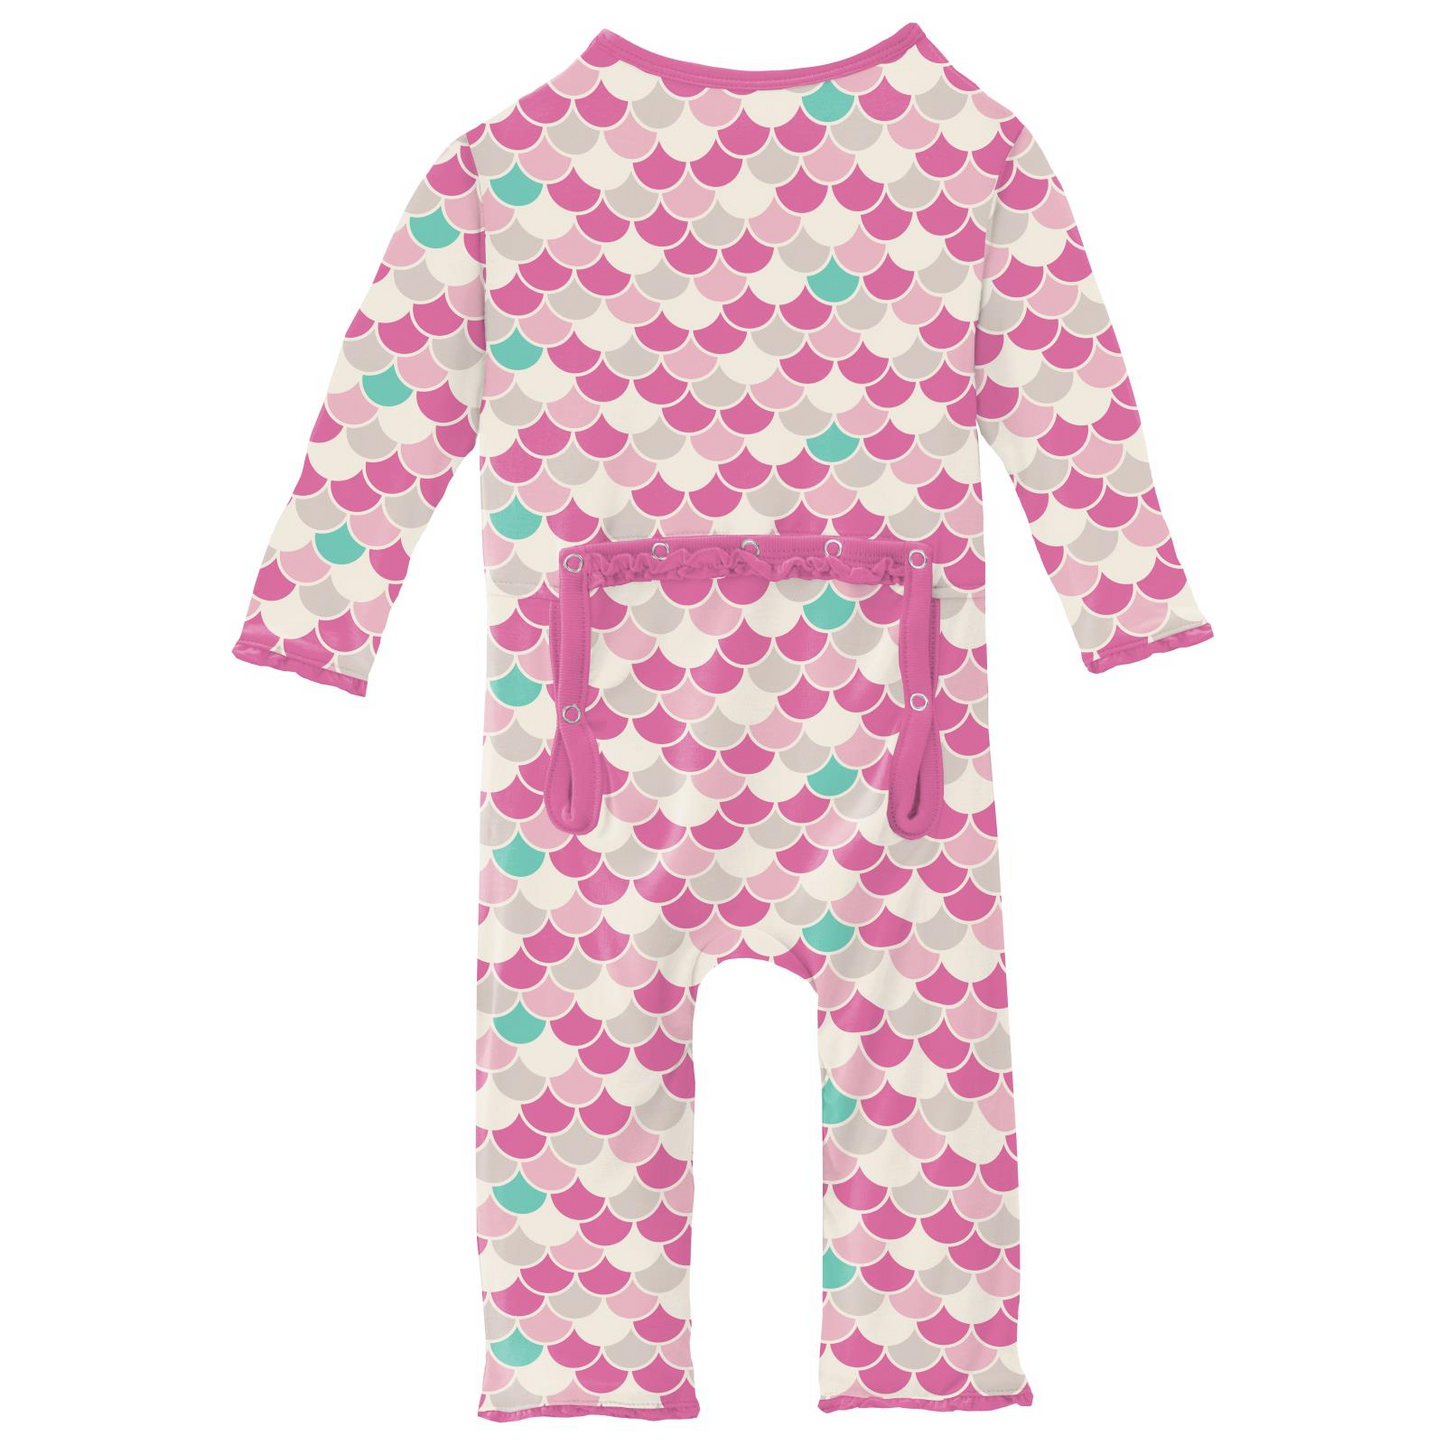 Bamboo Print Muffin Ruffle Coverall with 2 Way Zipper: Tulip Scales